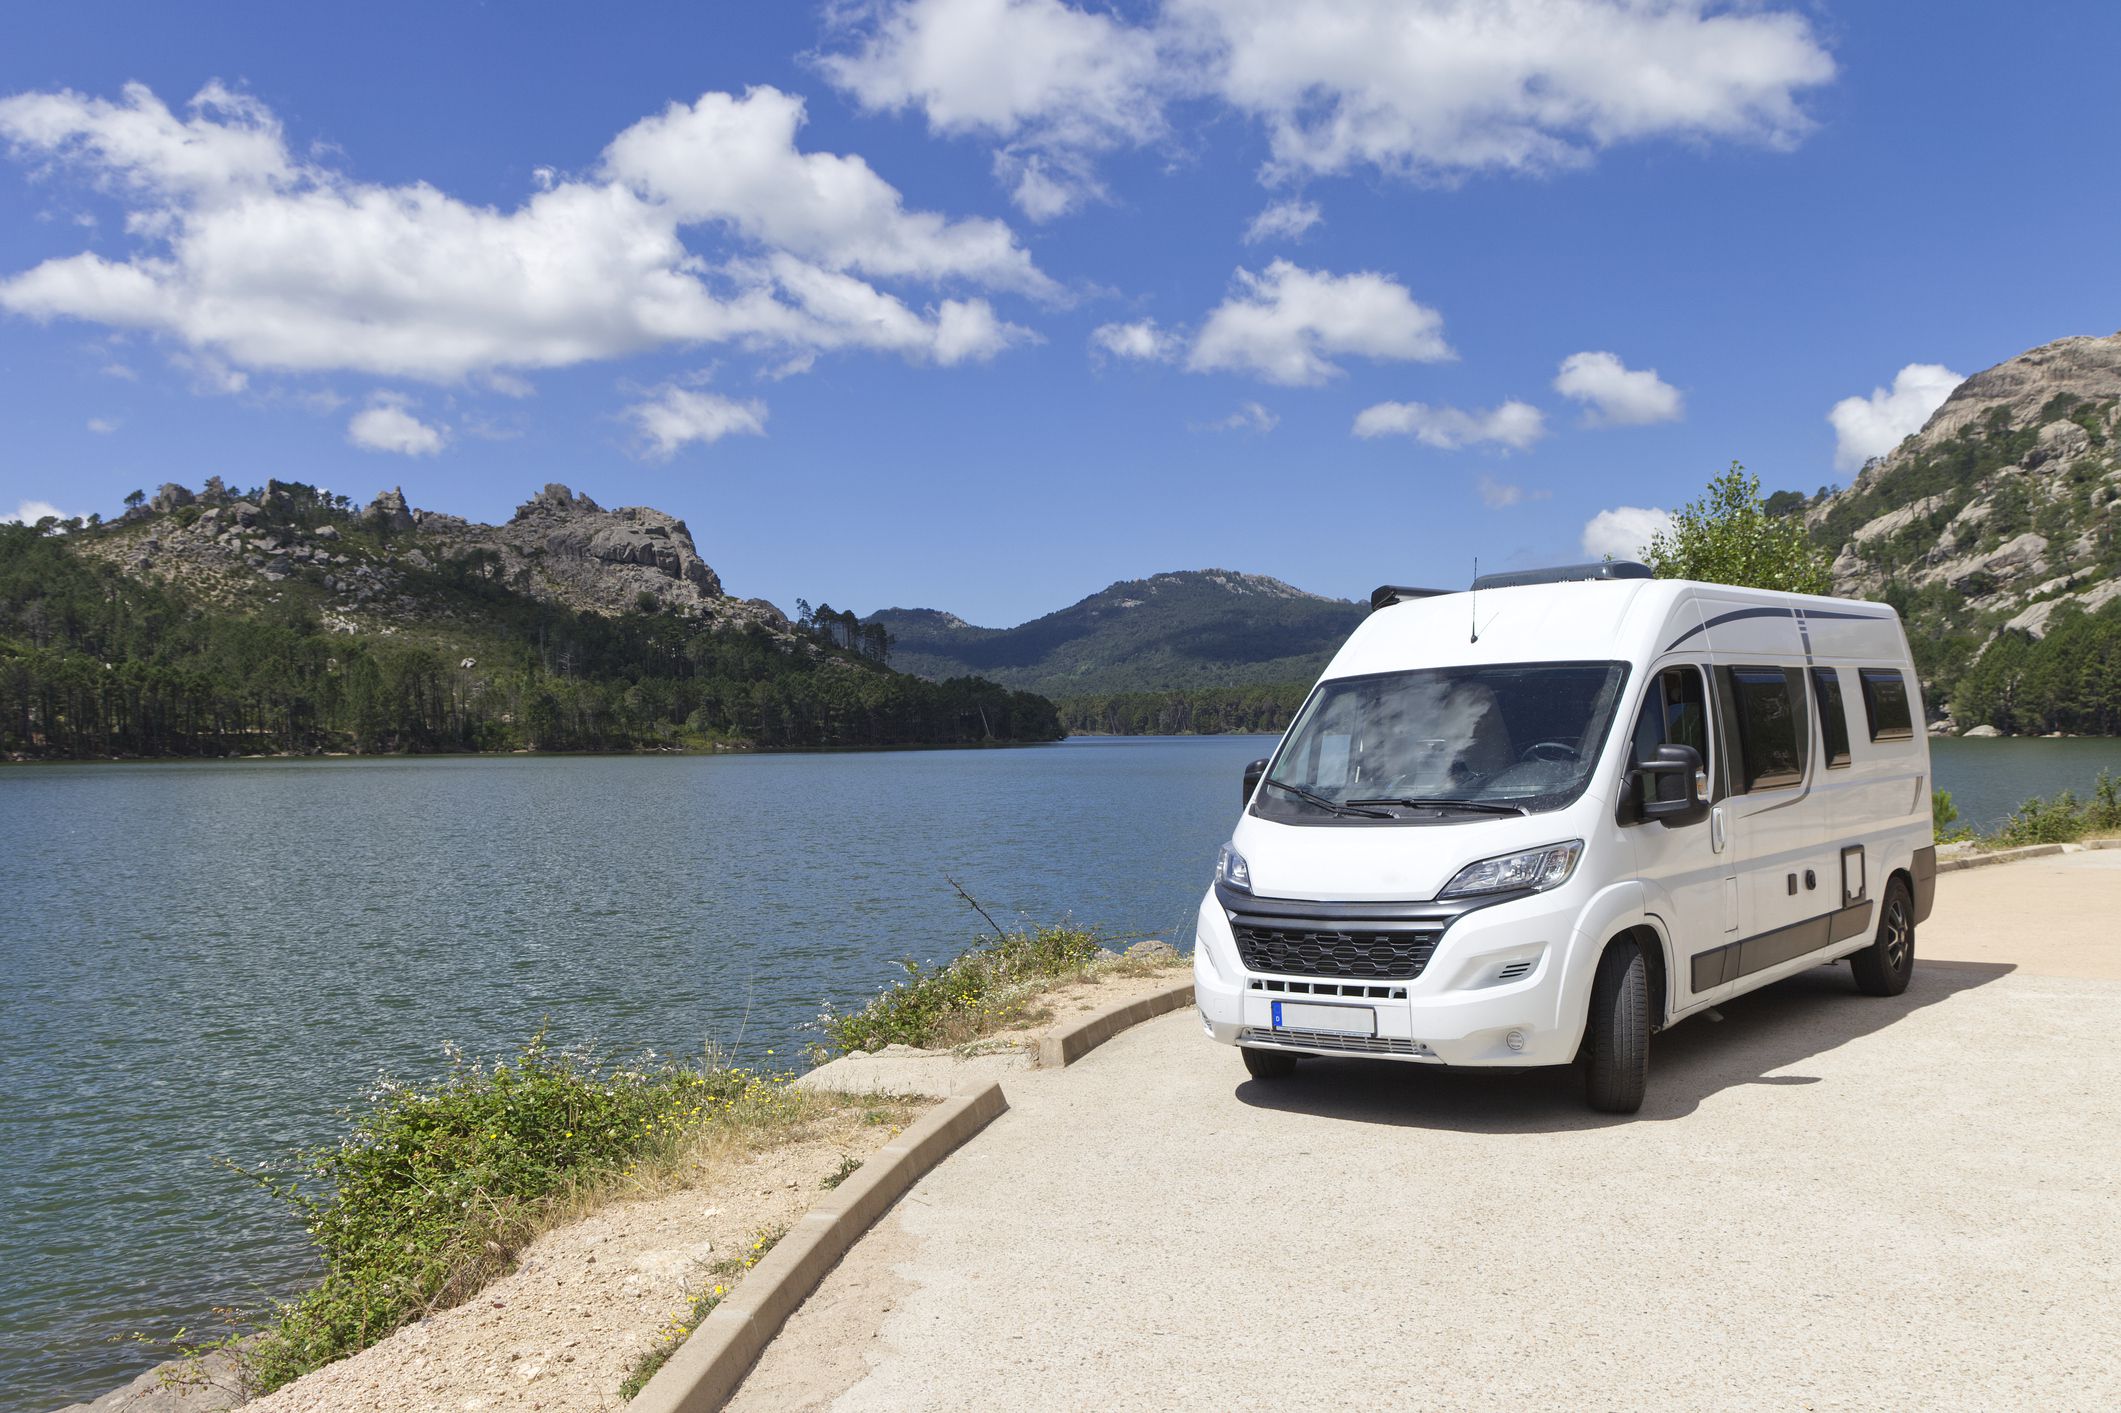 <p>Although most RVs bought are still towable, Class B motorized RV sales have surged. Many travelers consider the Class B models to be easier to drive and overall more convenient, especially in a pandemic era. Younger, first-time buyers are reportedly behind the surge with their embrace of a more “van life” approach to RVing. </p>